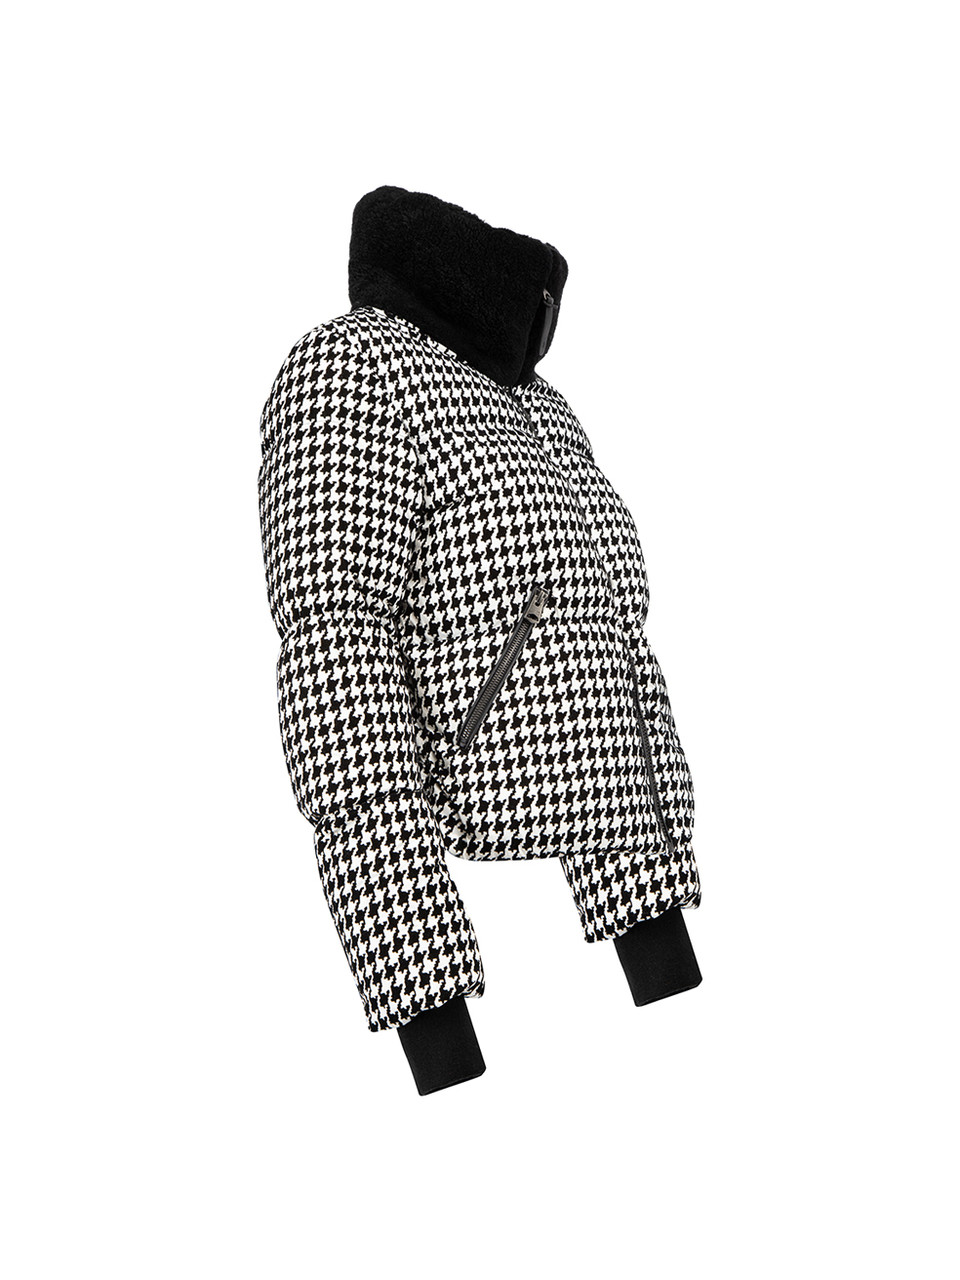 Mackage Houndstooth Quilted Down Jacket